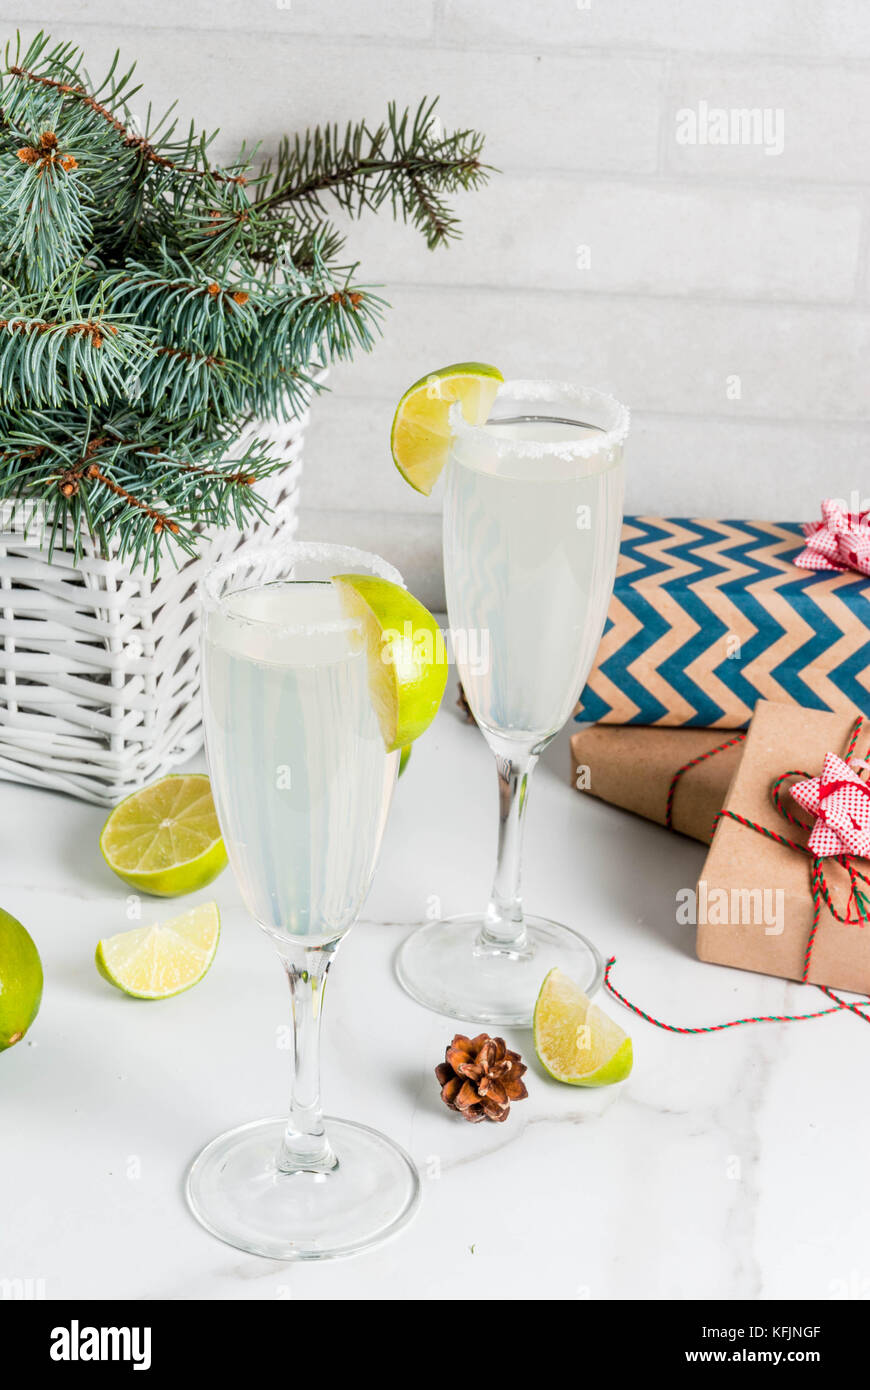 Ideas For Christmas And New Year Drinks Champagne Margarita Stock Photo Alamy